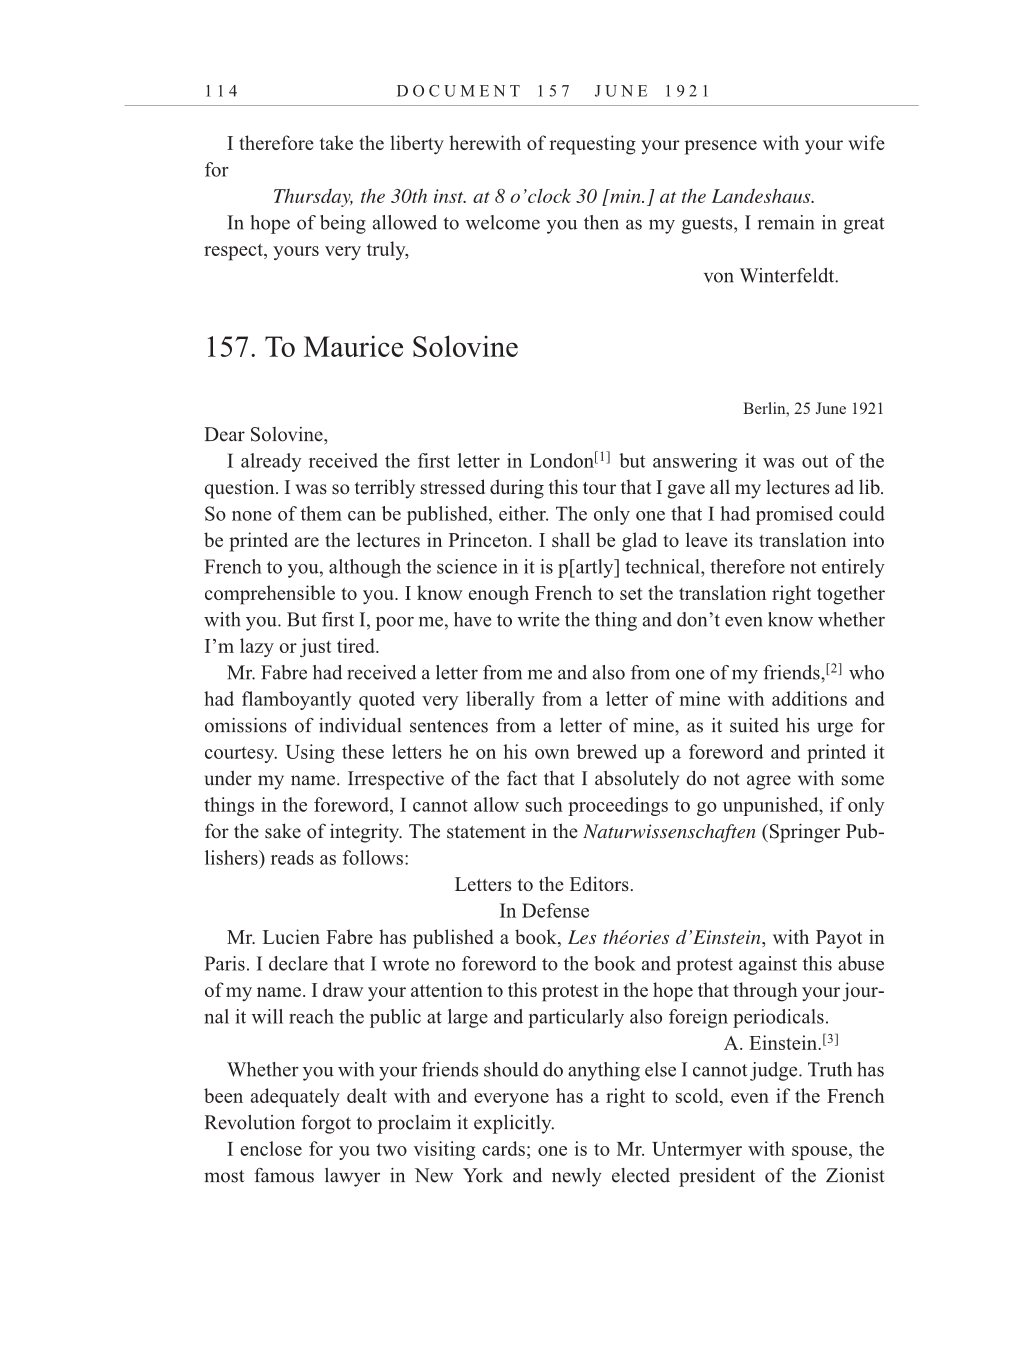 Volume 12: The Berlin Years: Correspondence, January-December 1921 (English translation supplement) page 114